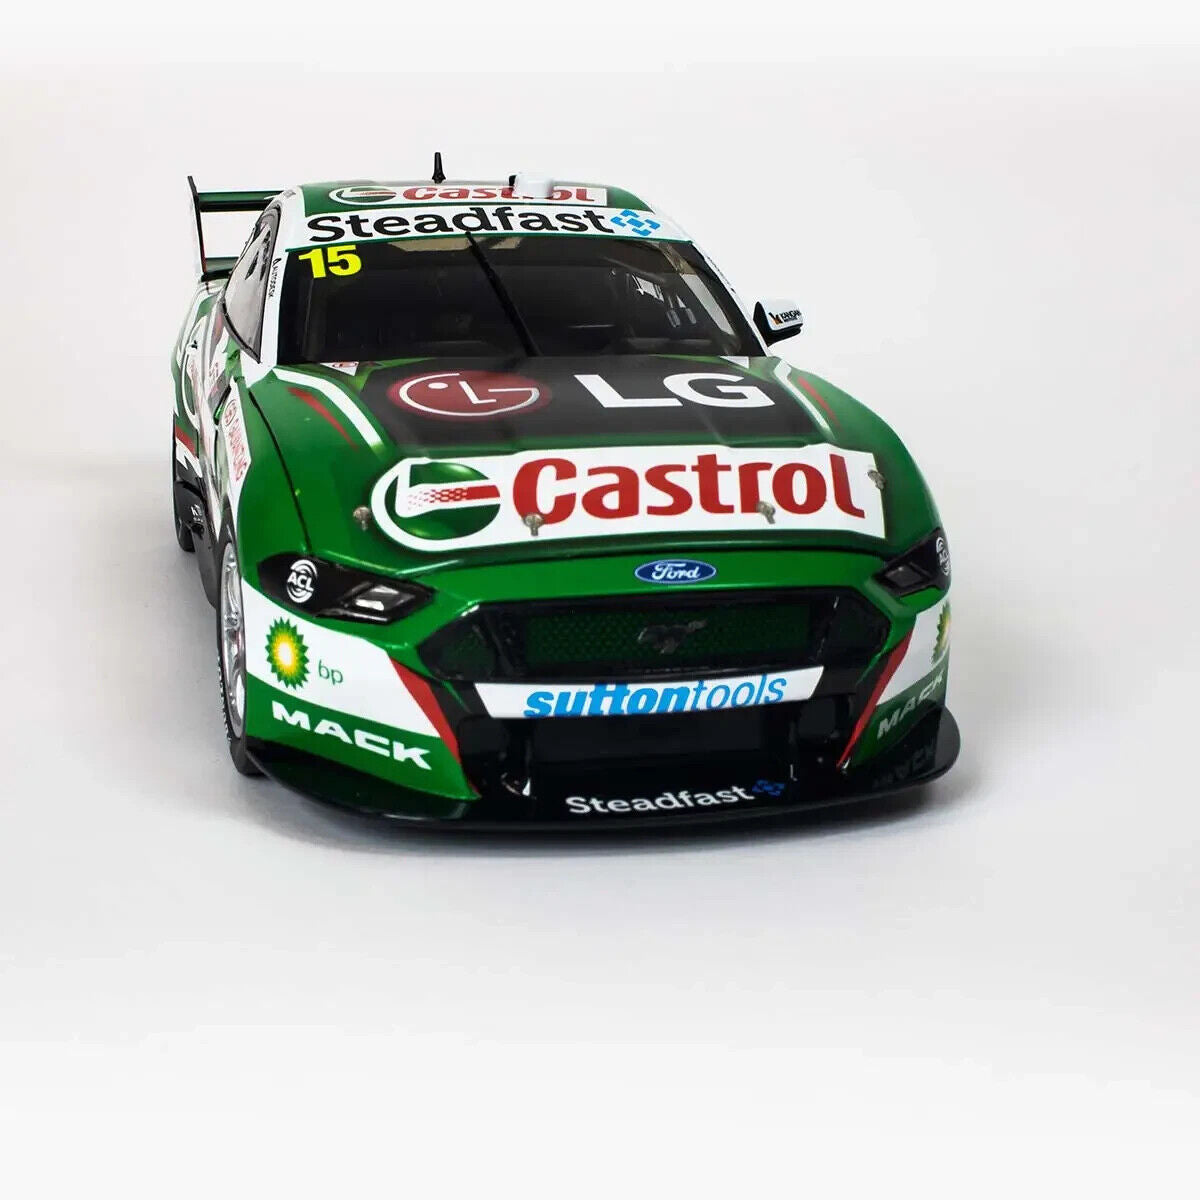 1/43 BIANTE FORD MUSTANG GT RICK KELLY CASTROL RACING 2020 THE BEND #15 #B43F20A